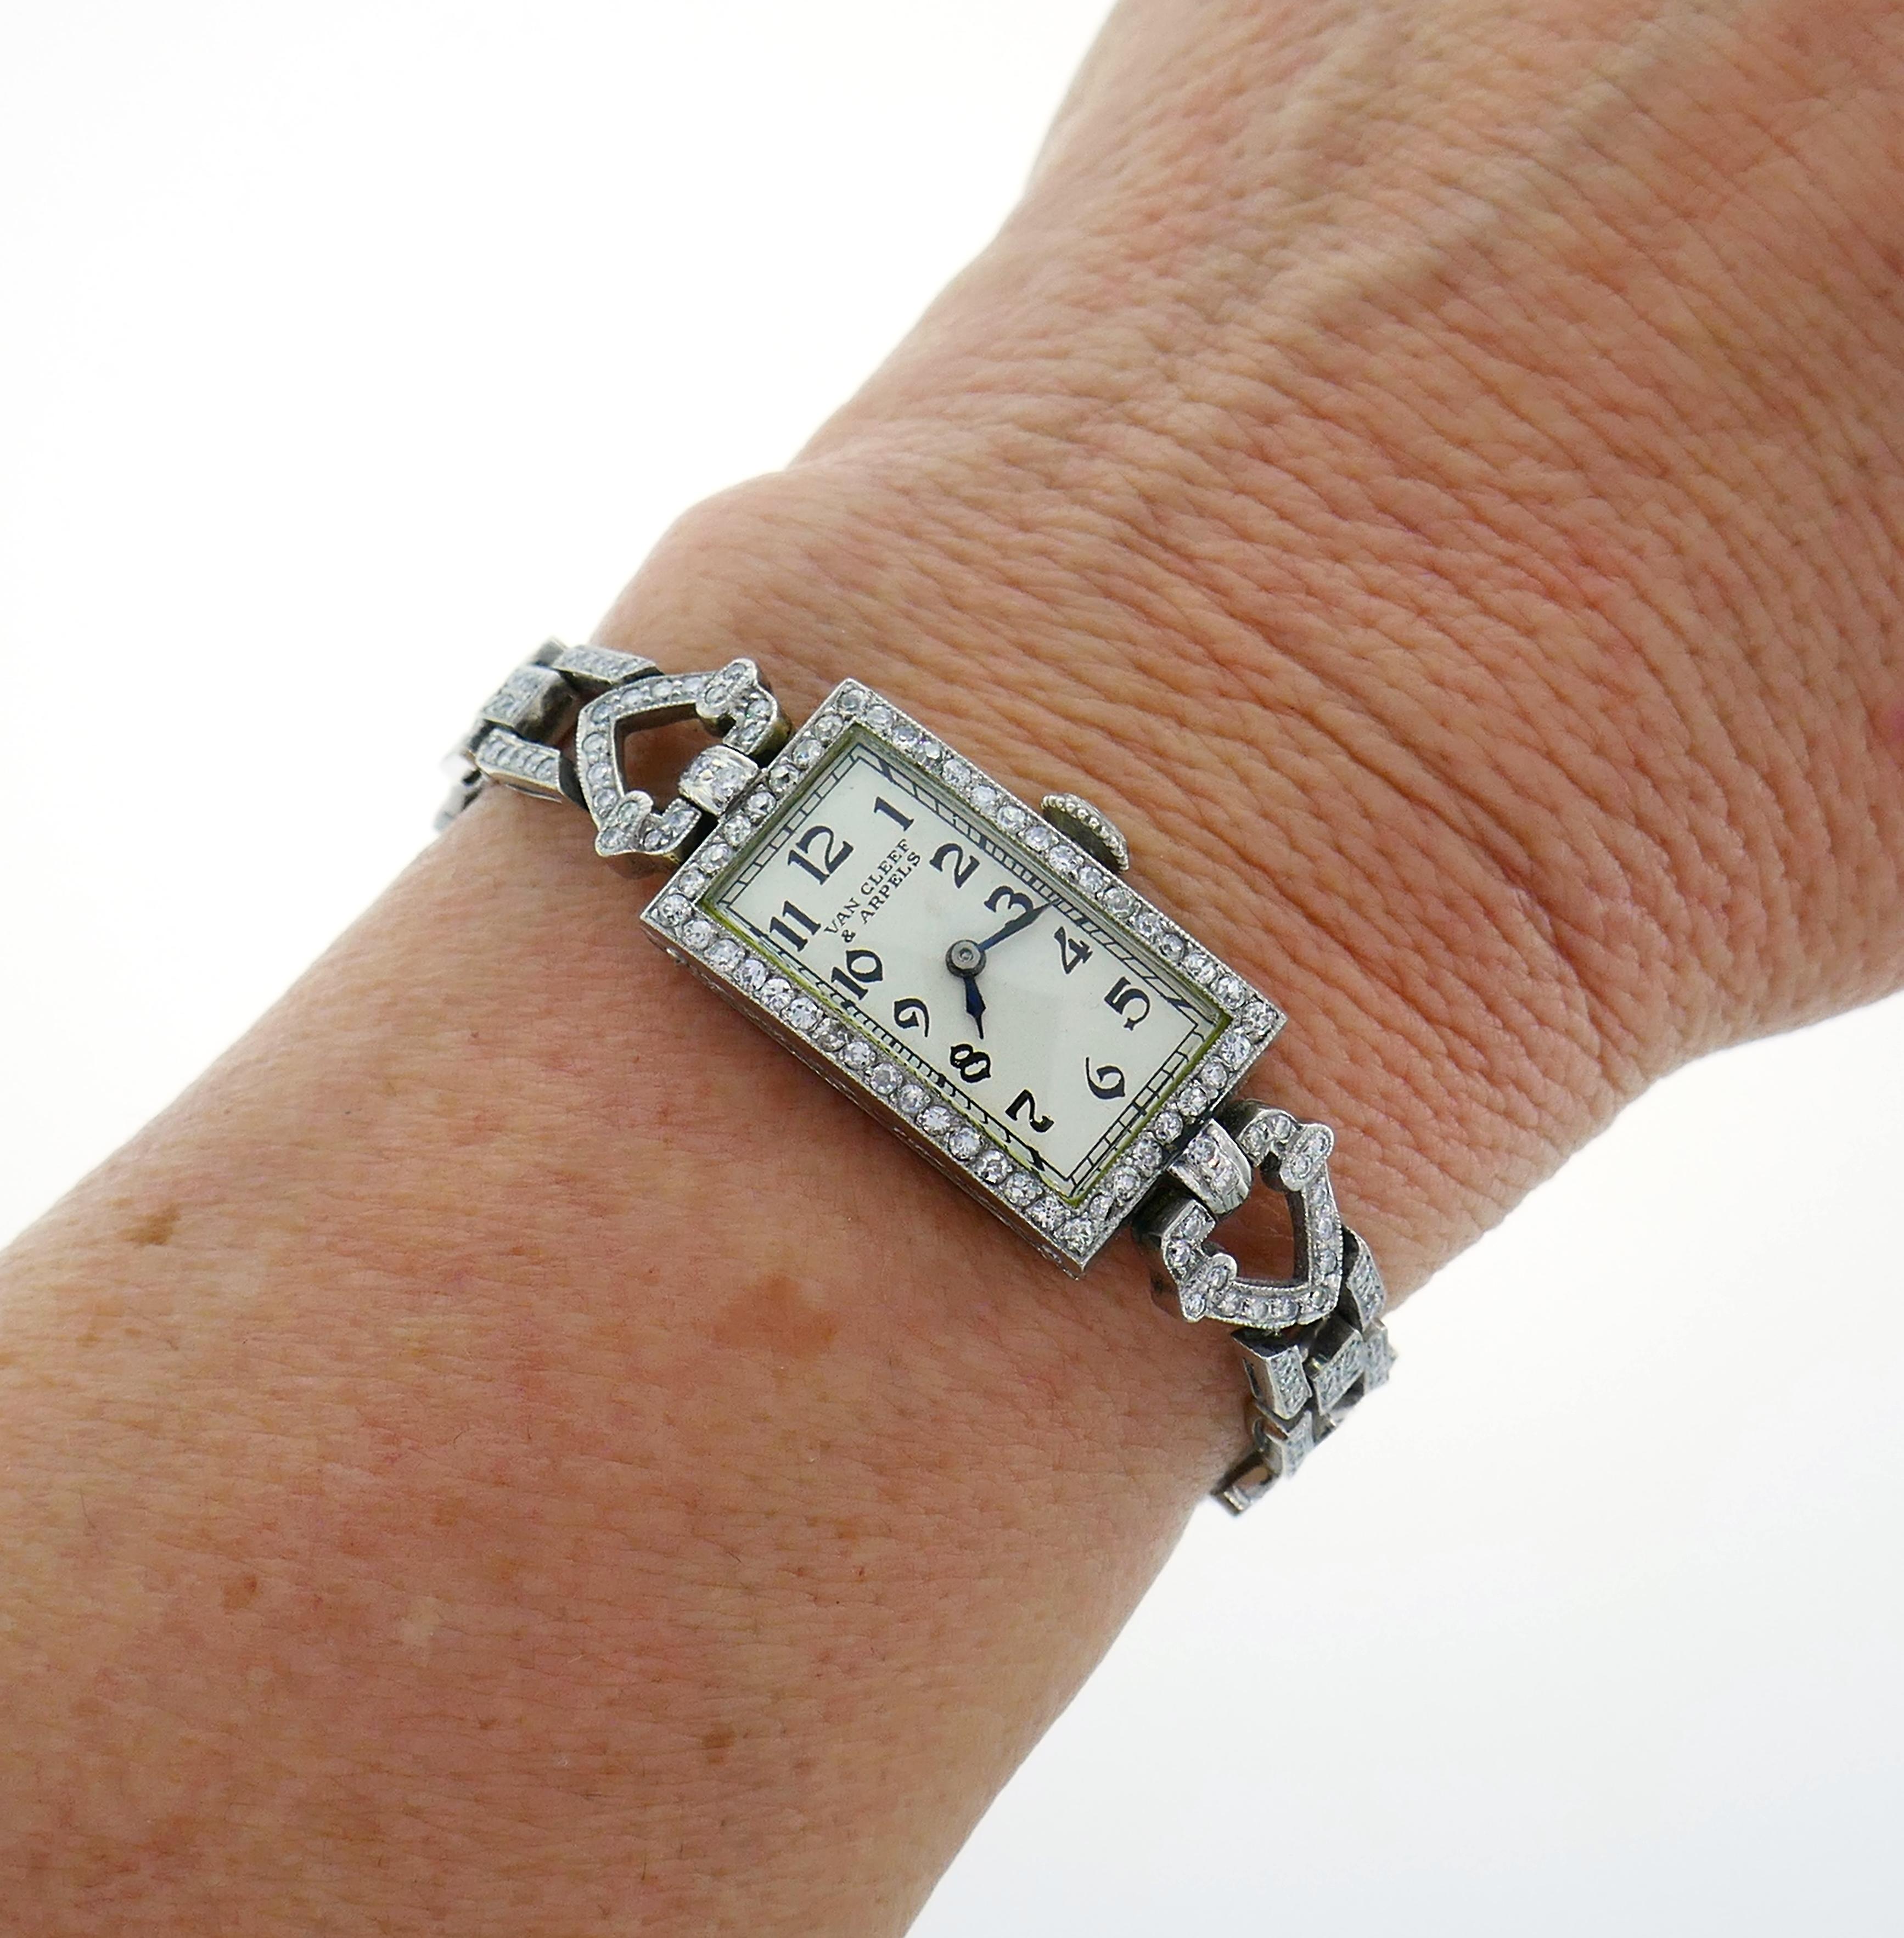 Beautiful lady's platinum and diamond Art Deco bracelet watch, created by  Van Cleef & Arpels in circa 1930s. With classic tank case, this elegant and timeless jeweled timepiece is a great addition to your jewelry collection. 
The watch is made of